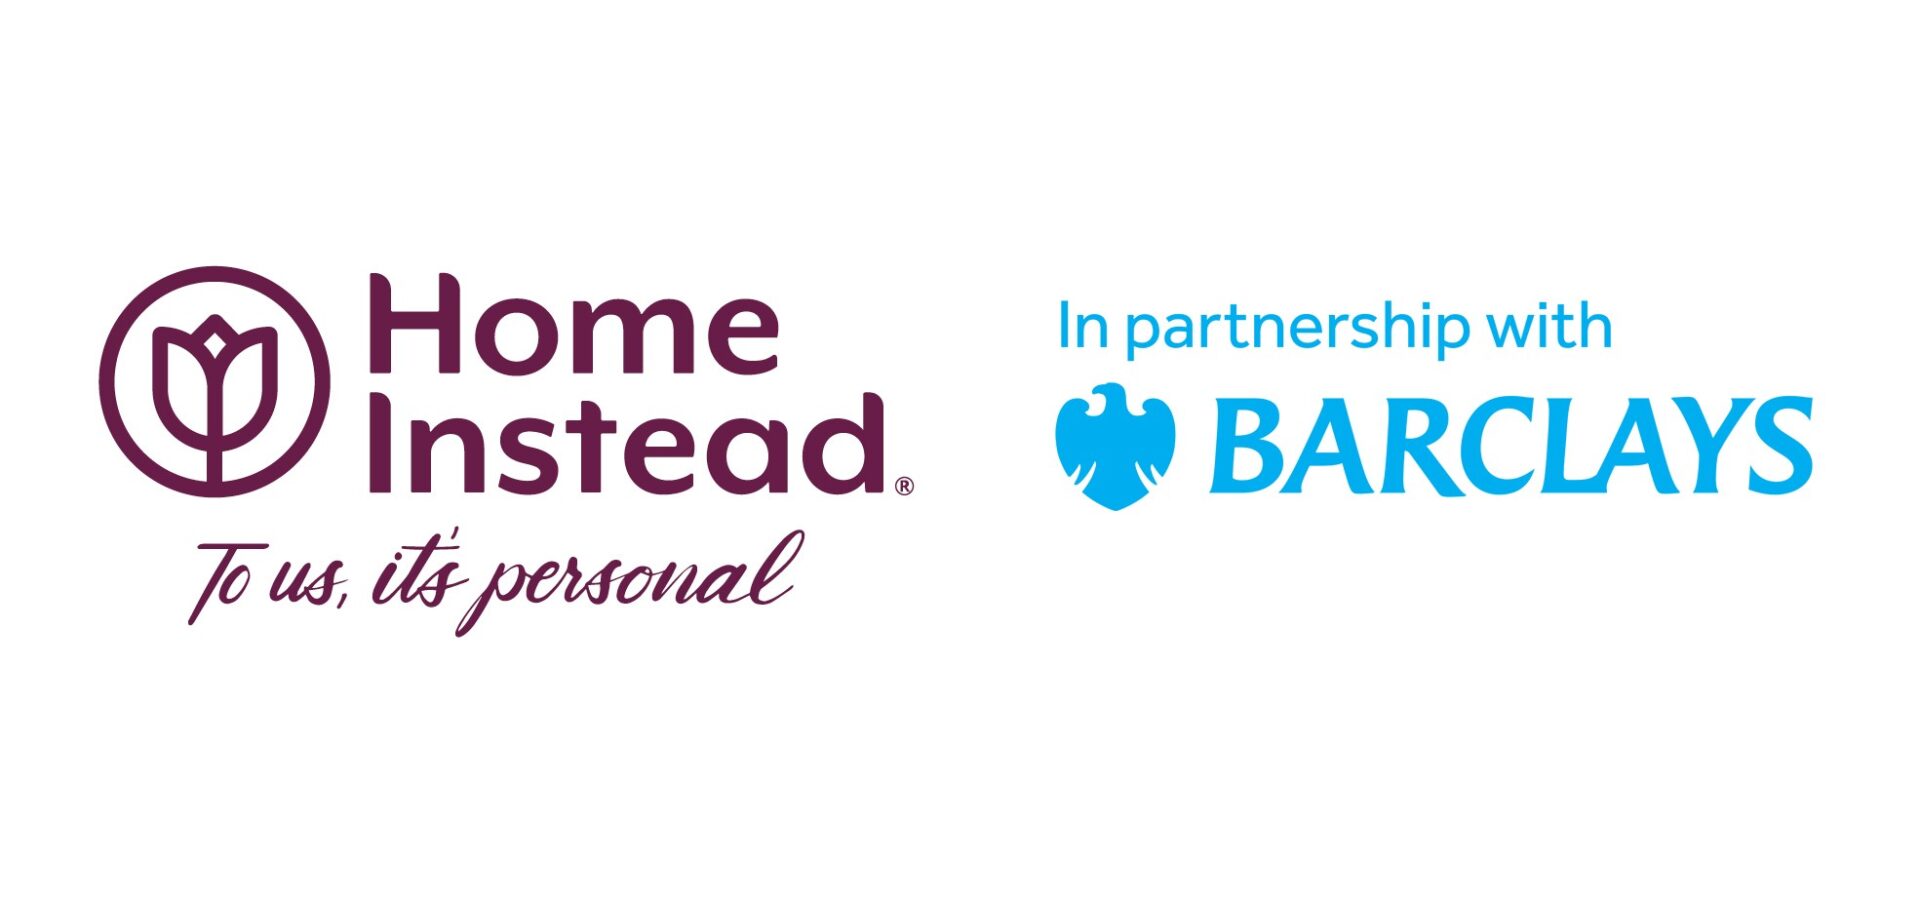 Home Instead partner with Barclays